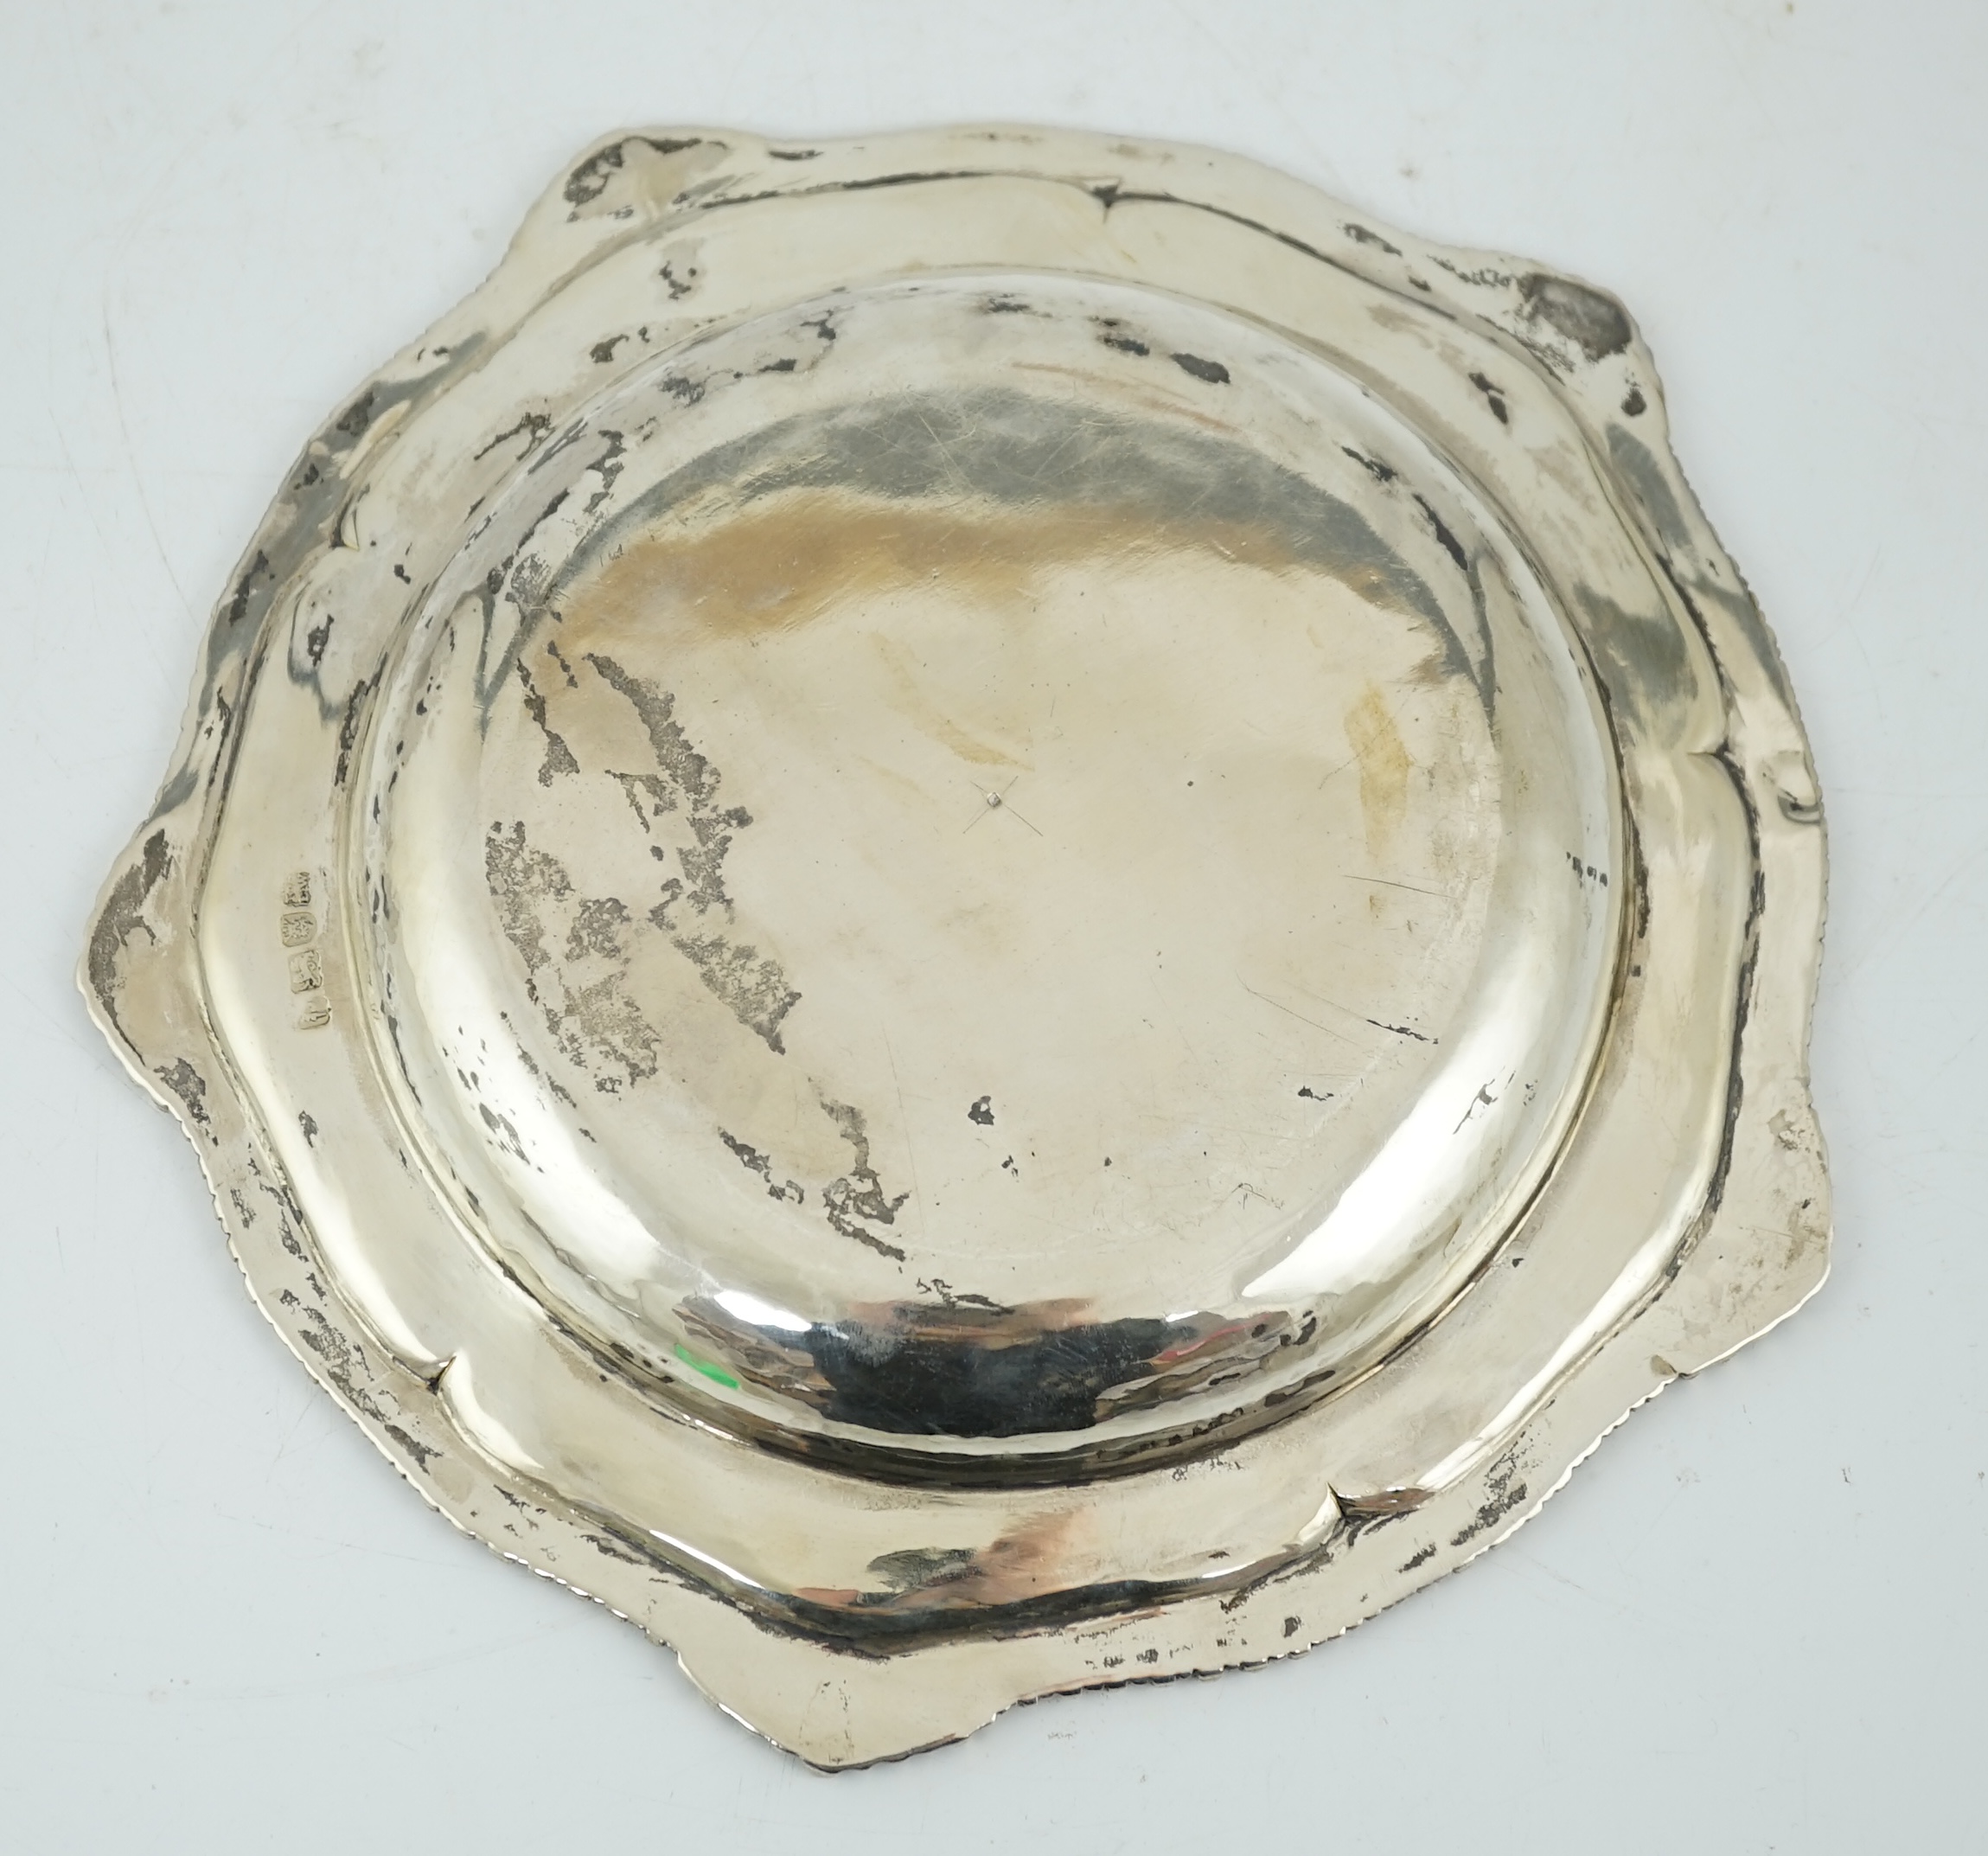 A George III silver soup plate, by Parker & Wakelin